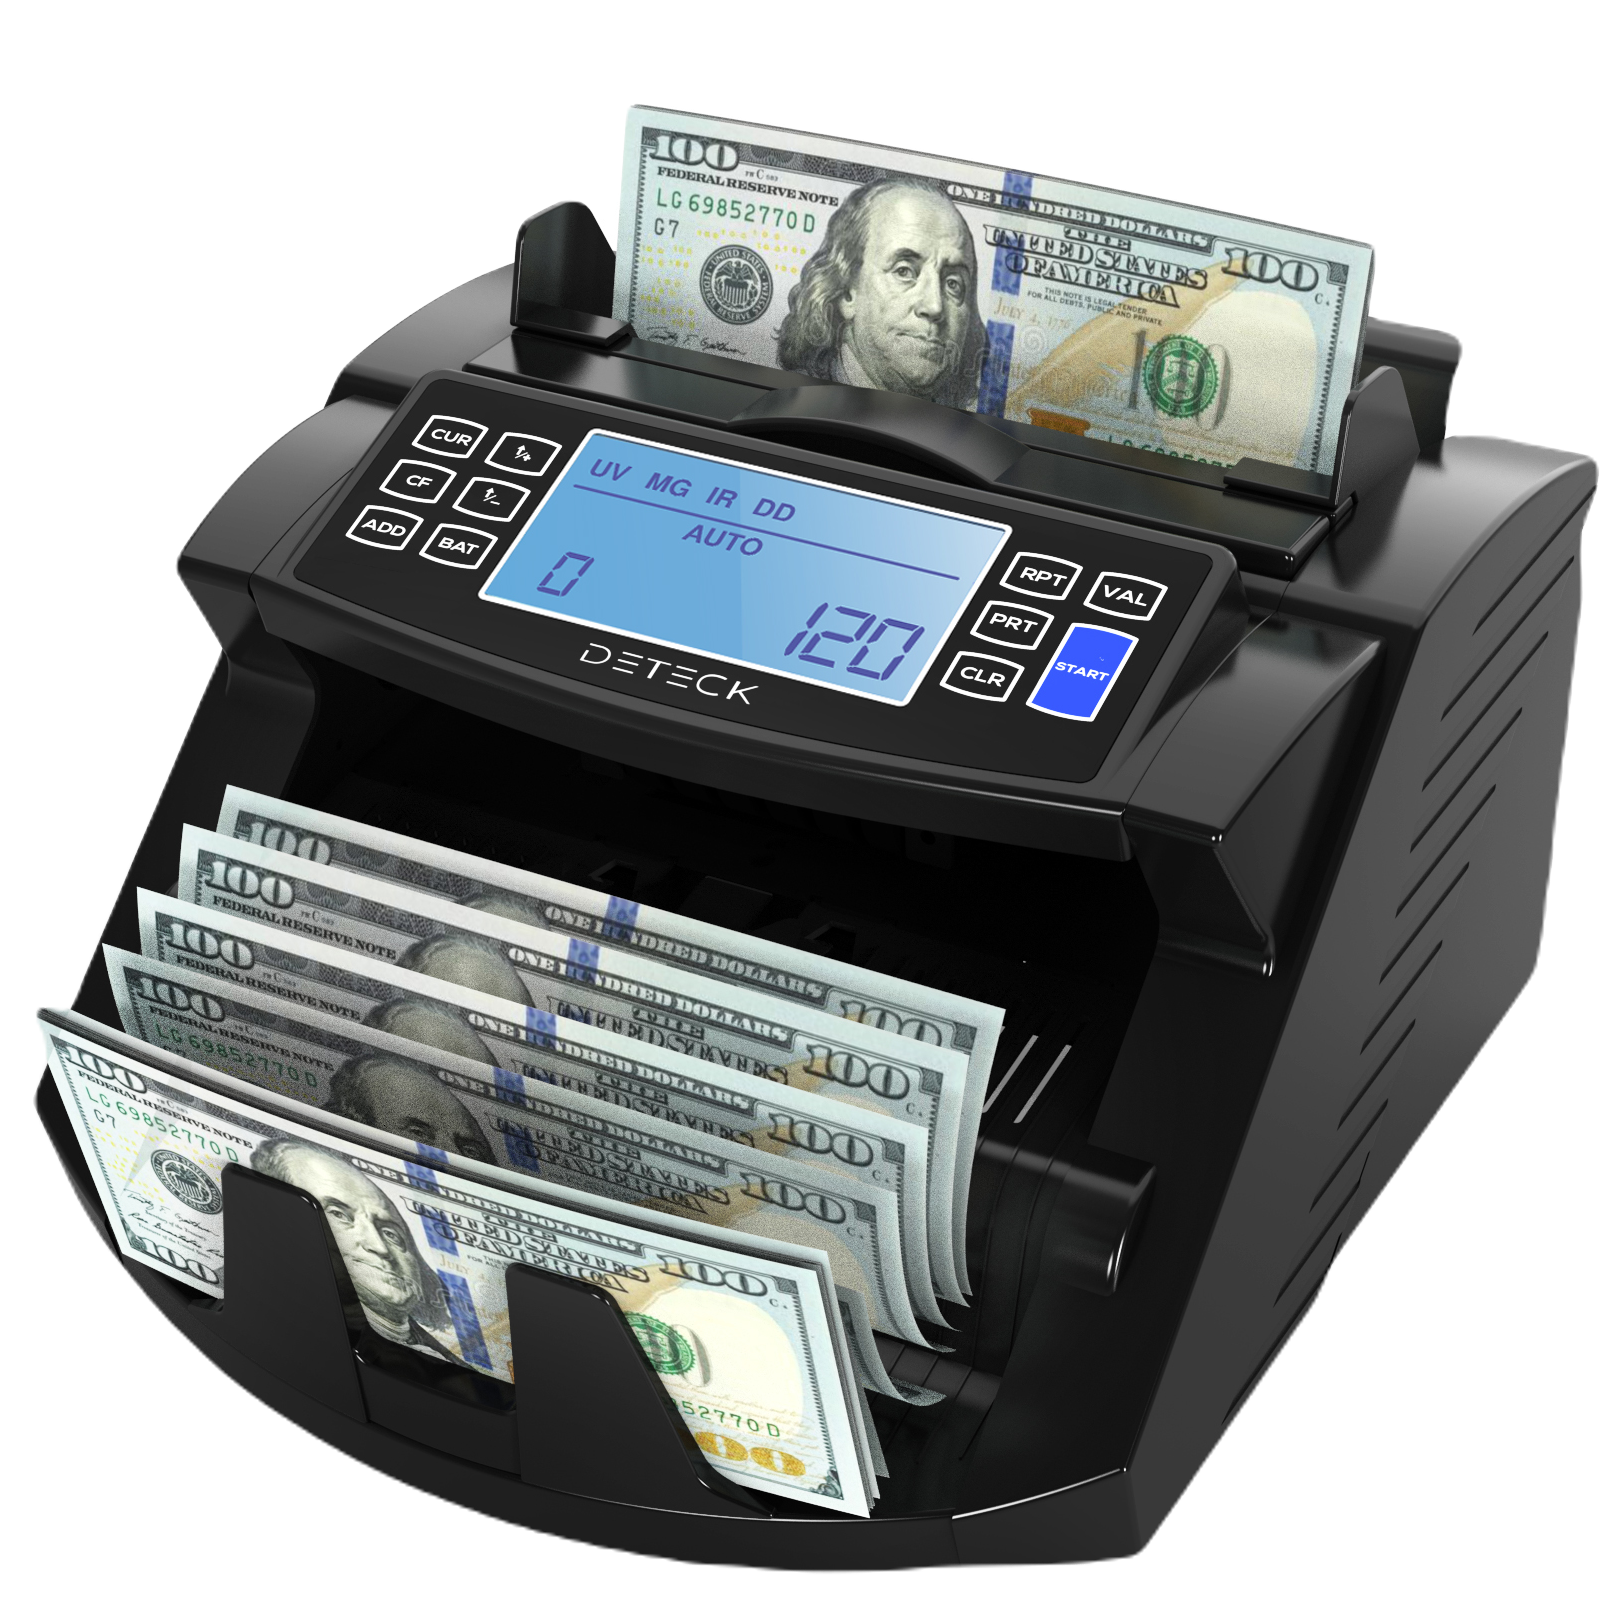 Money Counting Scale Bill Coin Counter Machine Banknote Cash Currency USD  ZZap